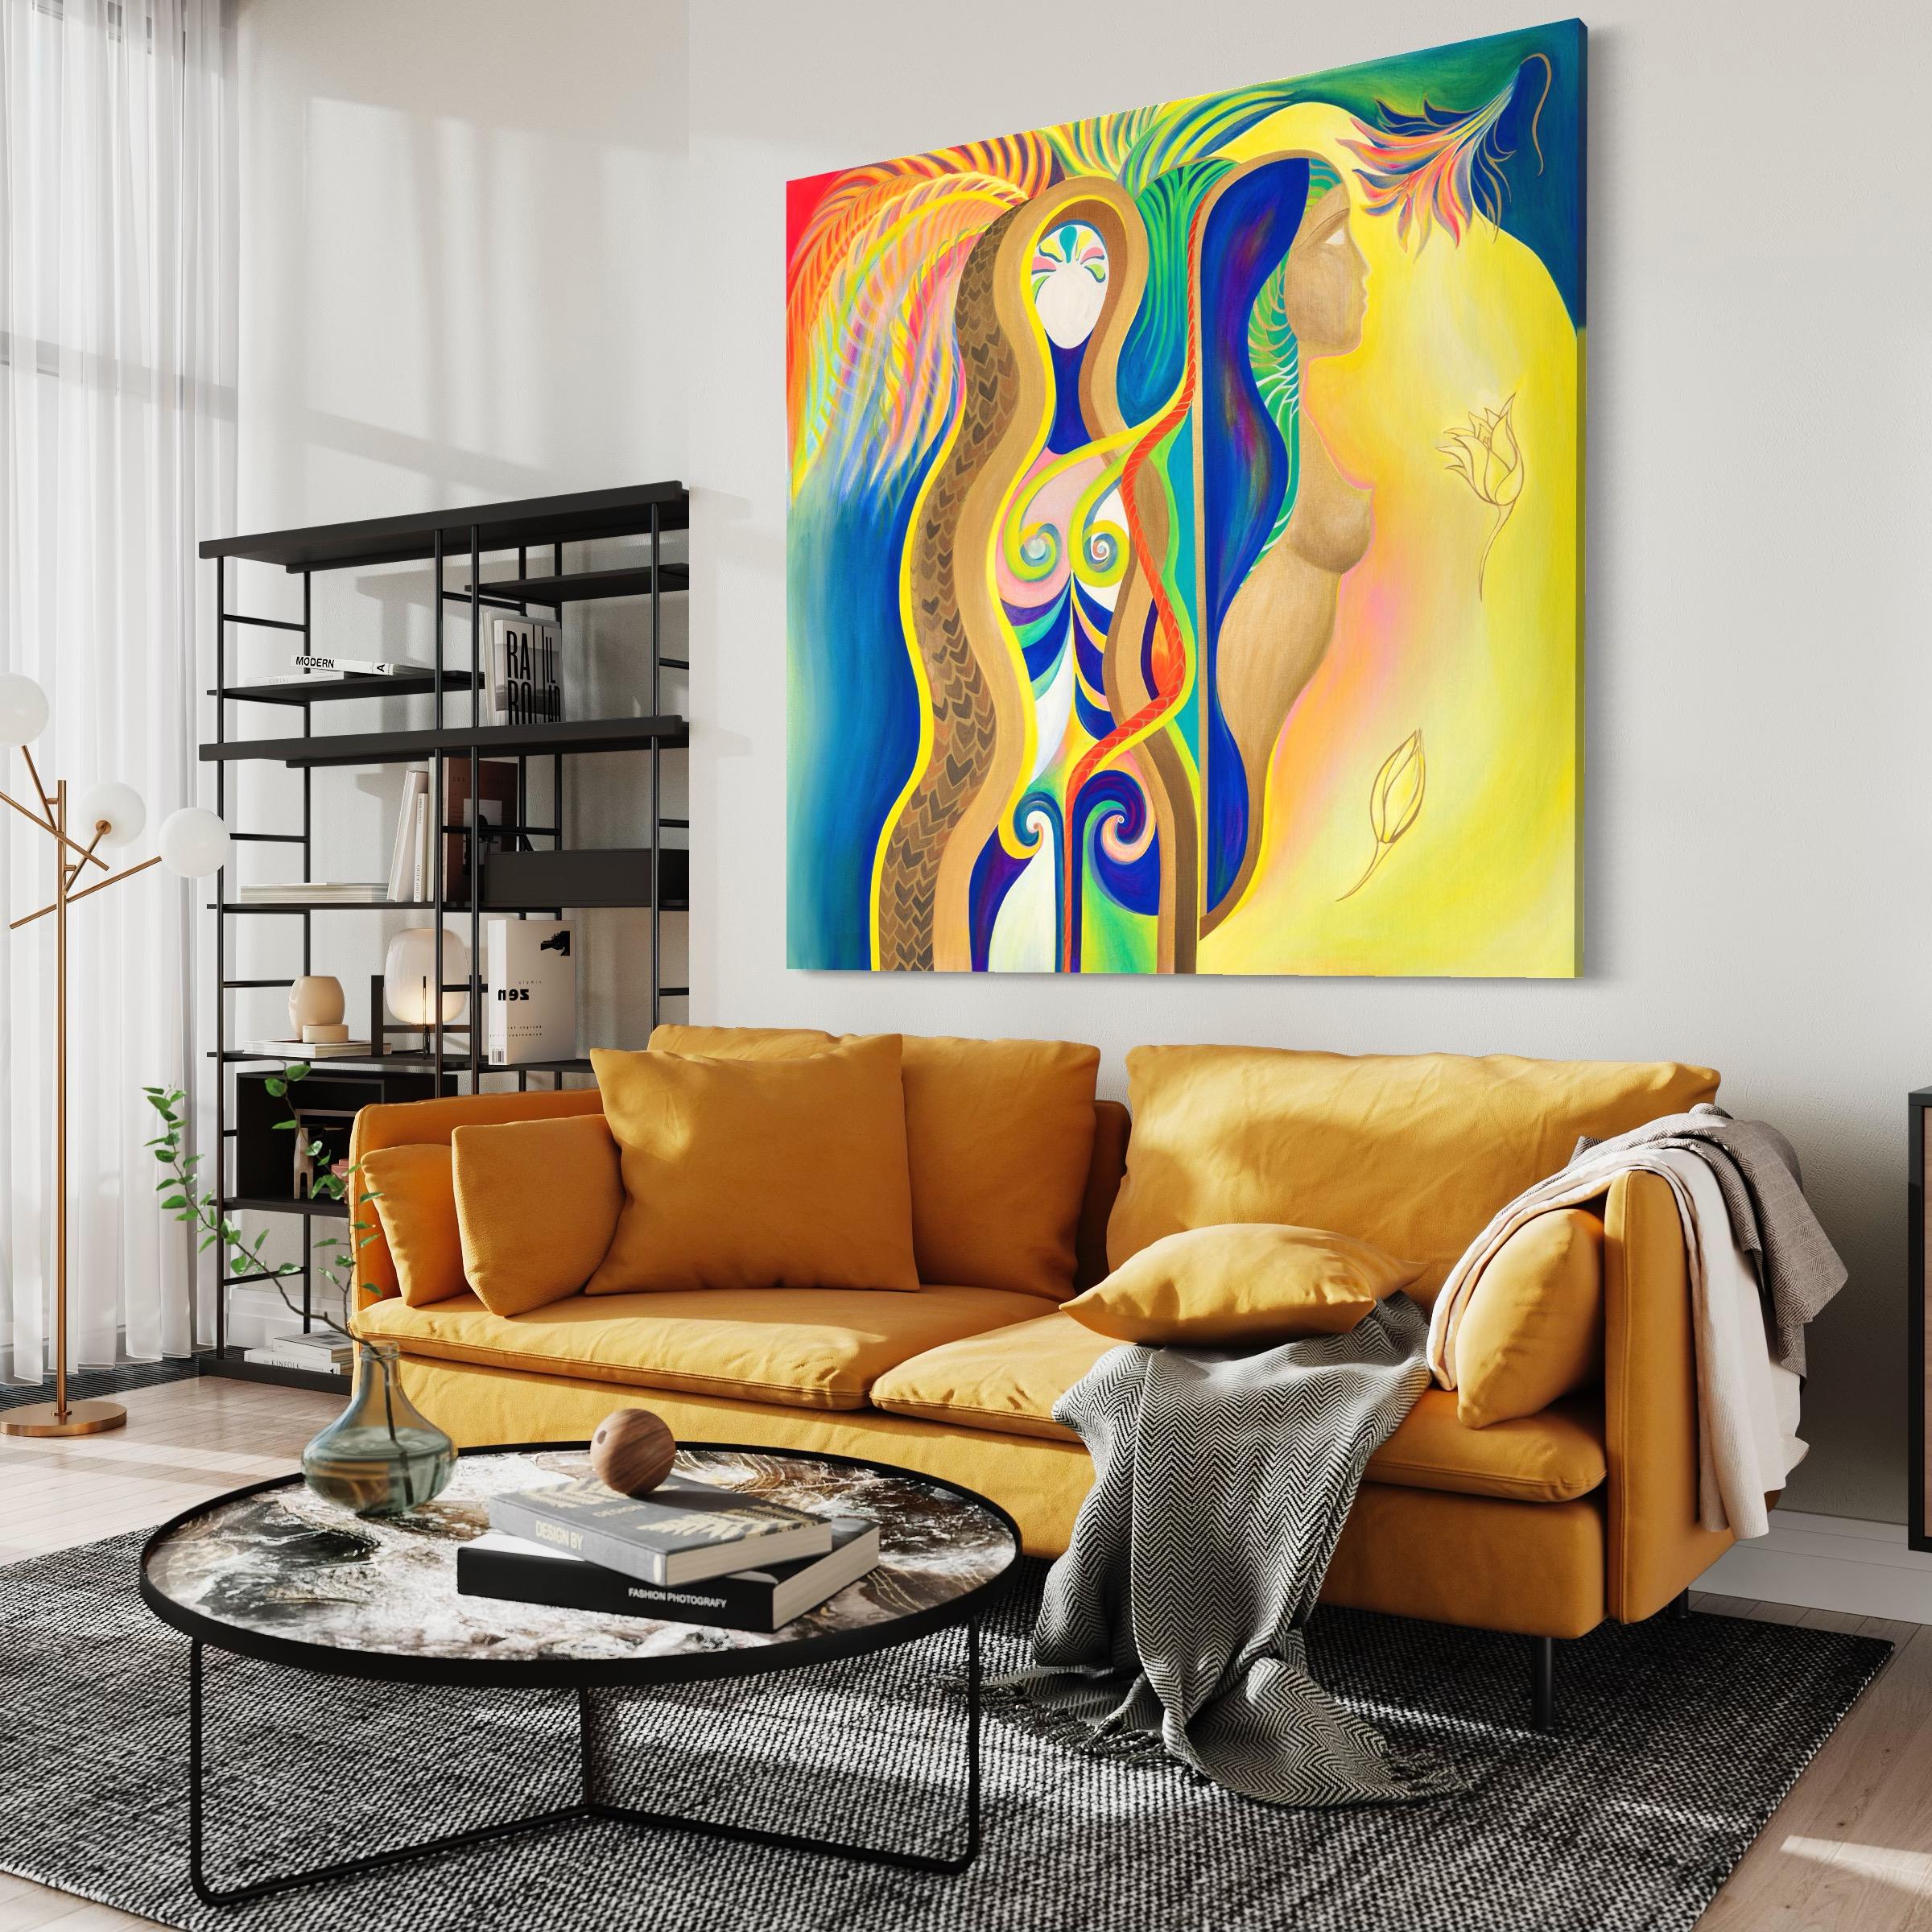 This square 60 inch original, neon colored painting on linen is stretched, wired and ready to hang. It is signed by the artist on the back of the artwork. 

Nelly Zagury is a fascinating artist who creates captivating works of art that are heavily